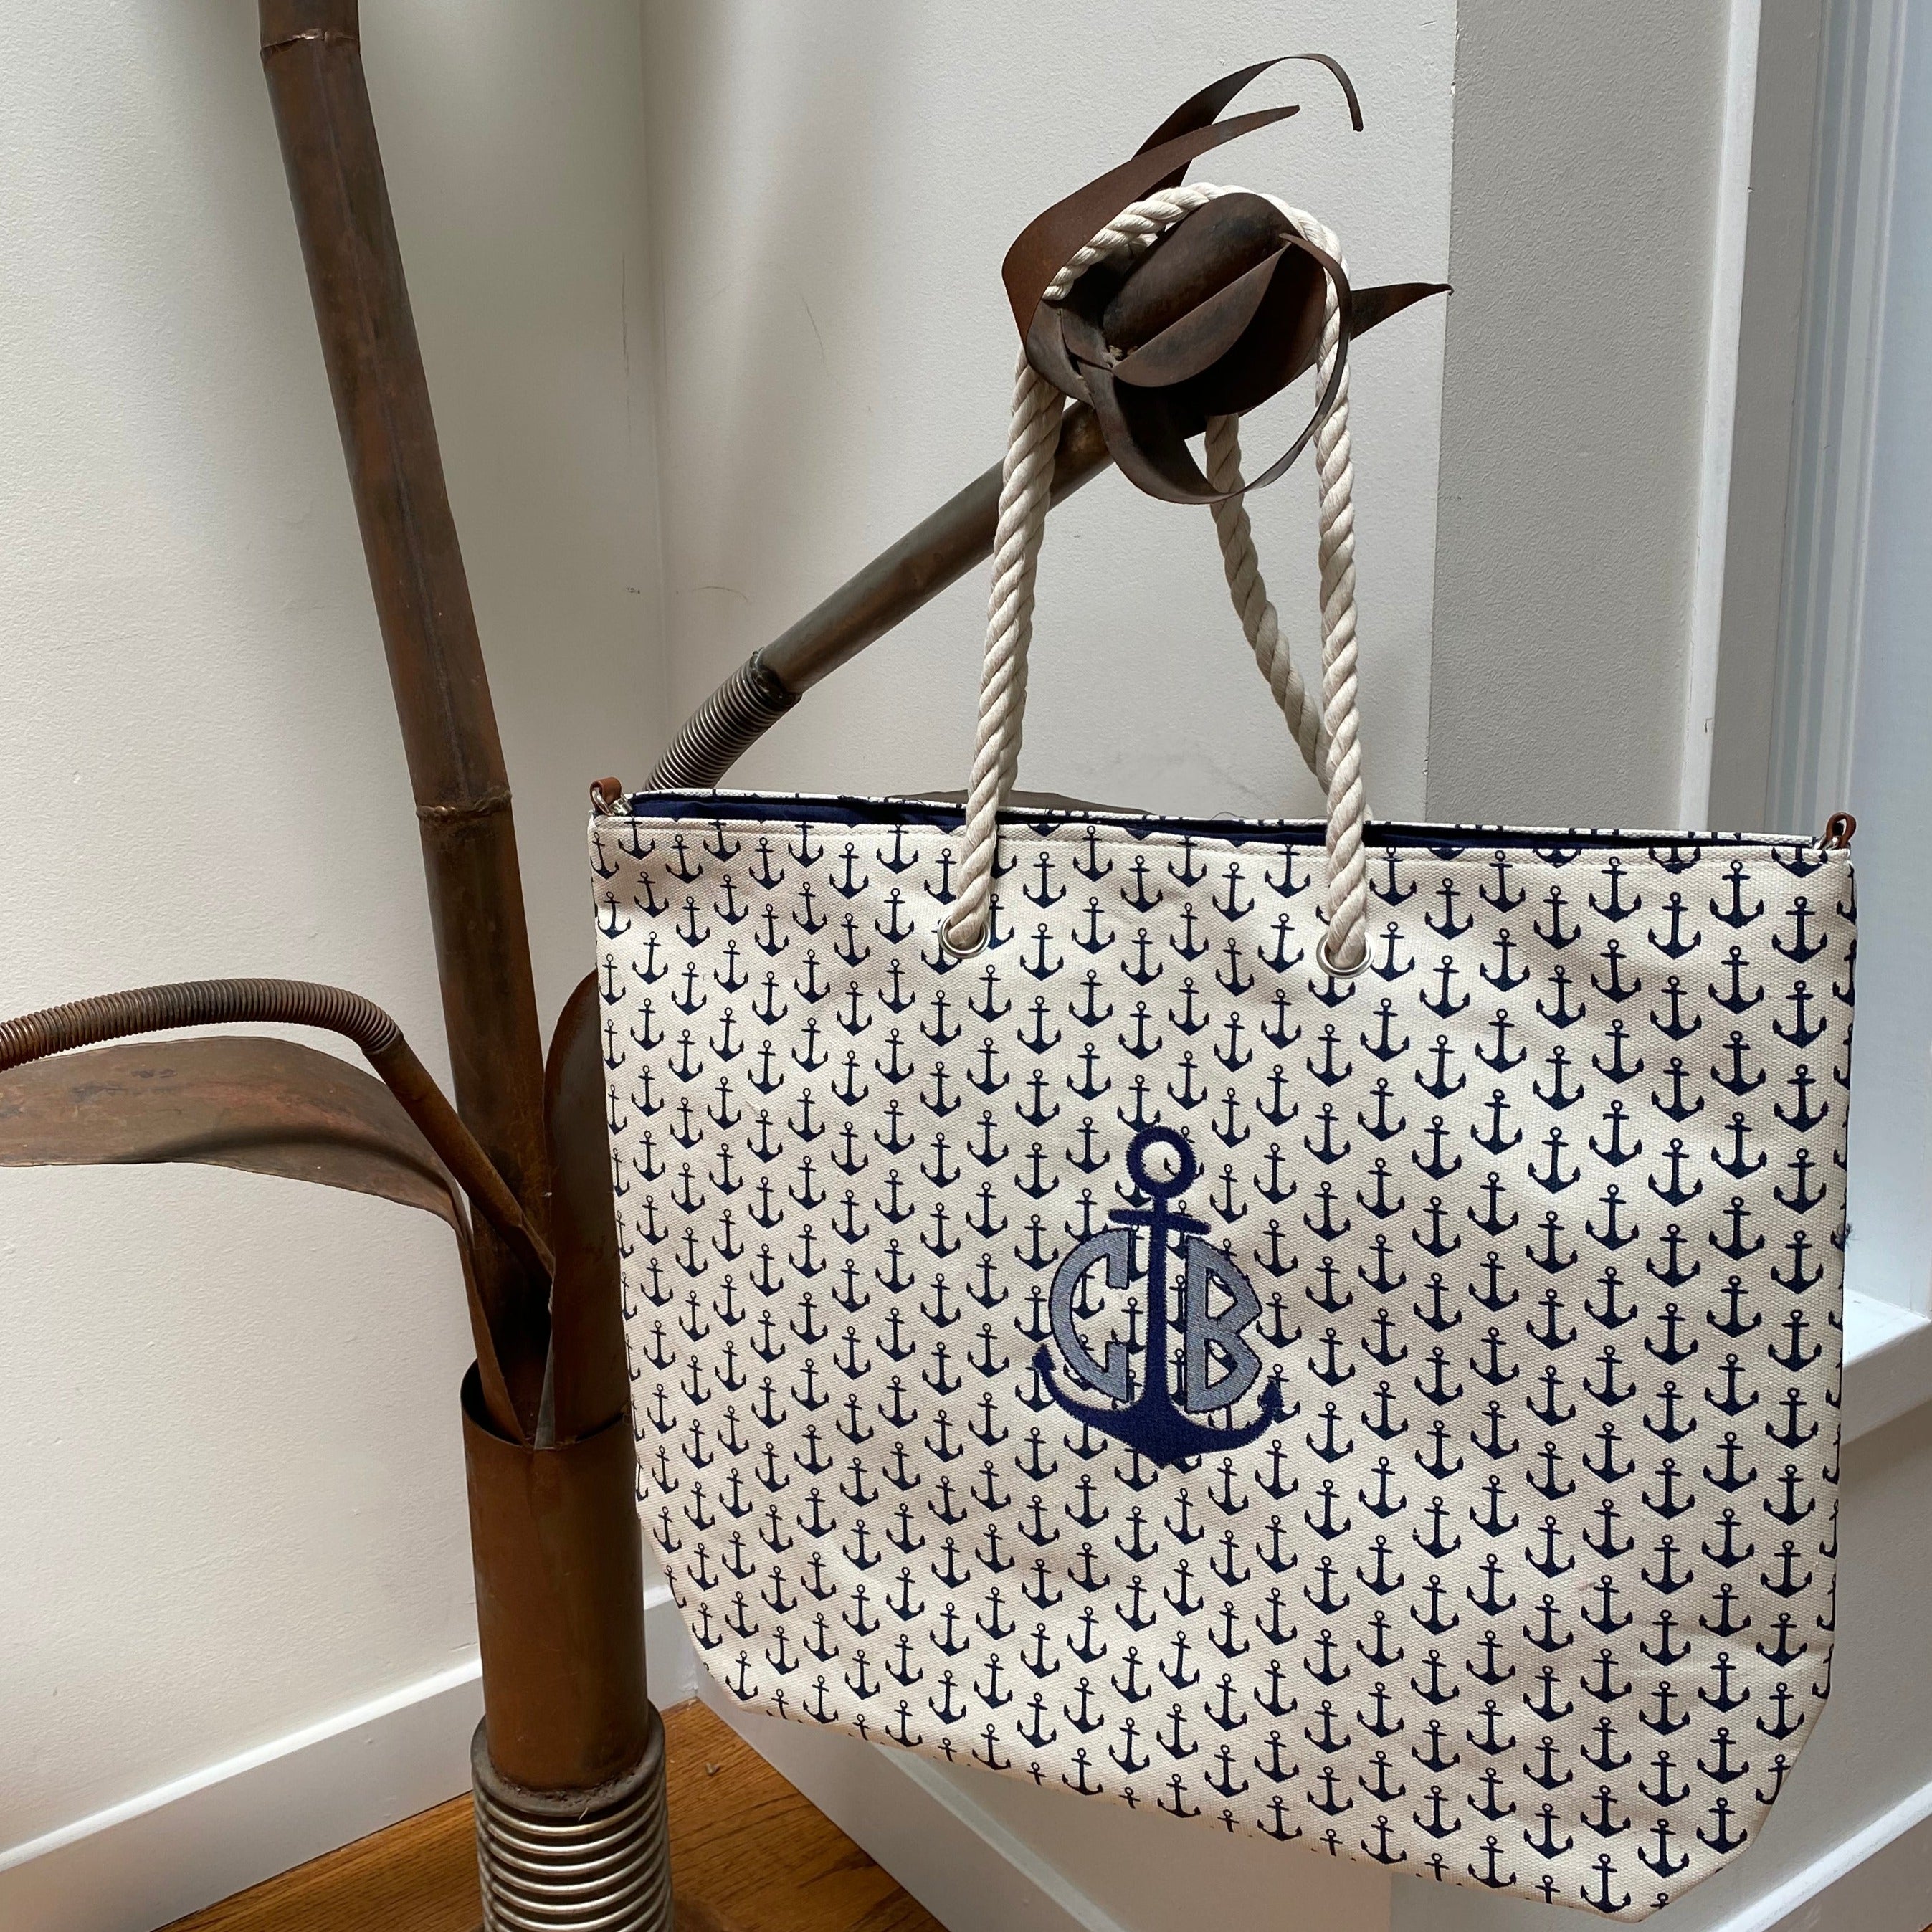 Monogrammed Purse Tote